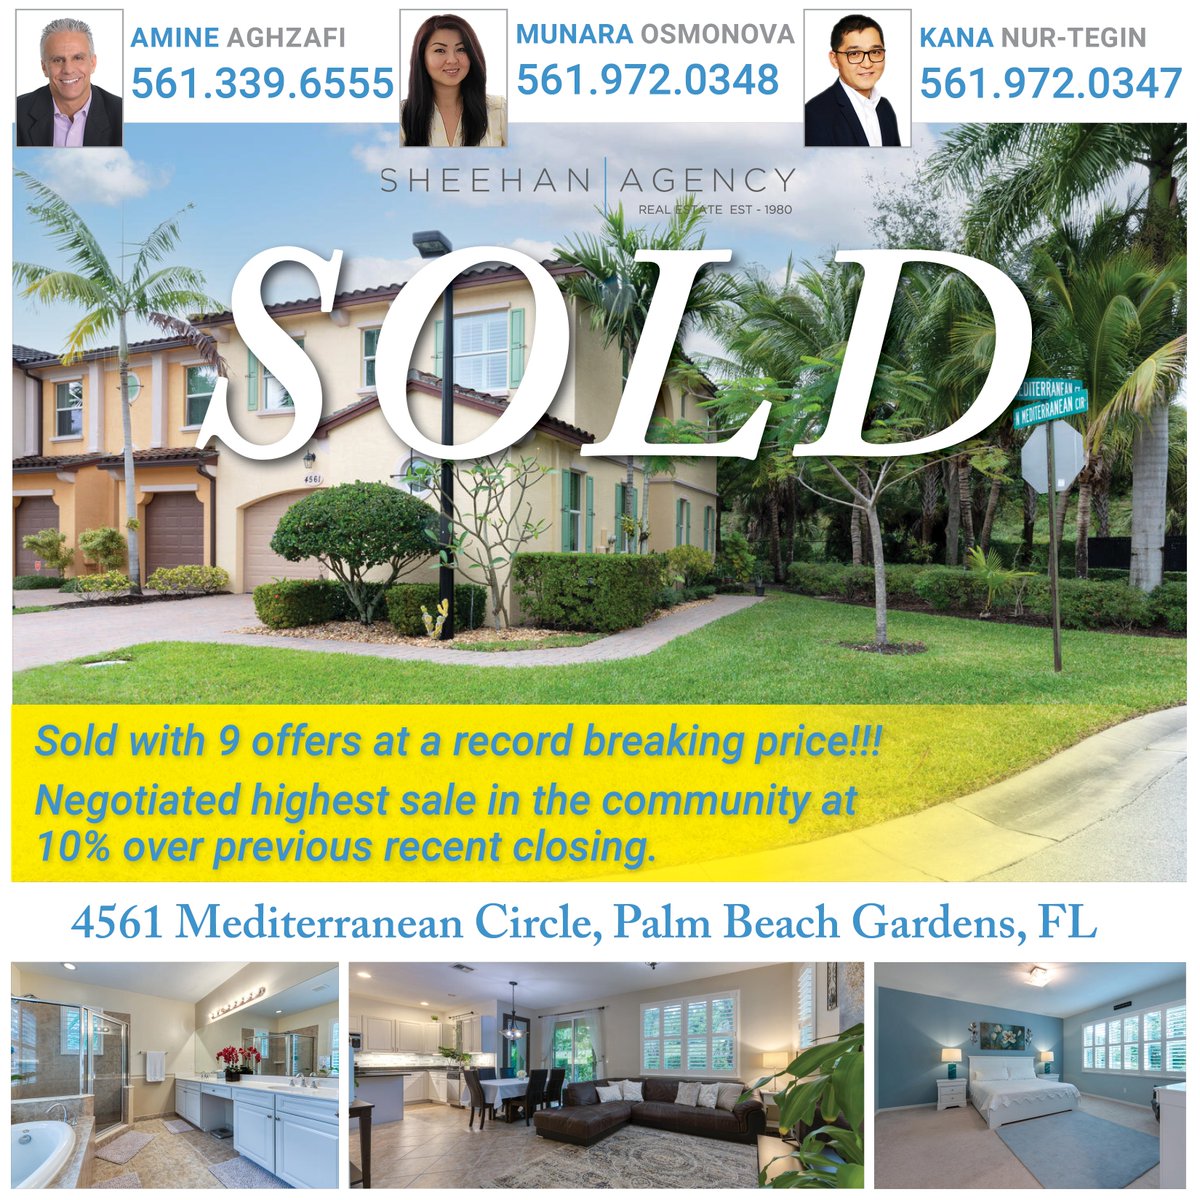 SOLD! 🎉
Sold with 9 offers at a record-breaking price!!!
Negotiated highest sale in the community at 10% over previous recent closing.
📍4561 Mediterranean Circle, Palm Beach Gardens, FL 

#sold #recordbreakingsale #multipleoffers
#realestate #thesheehanagency
#treviatthegardens